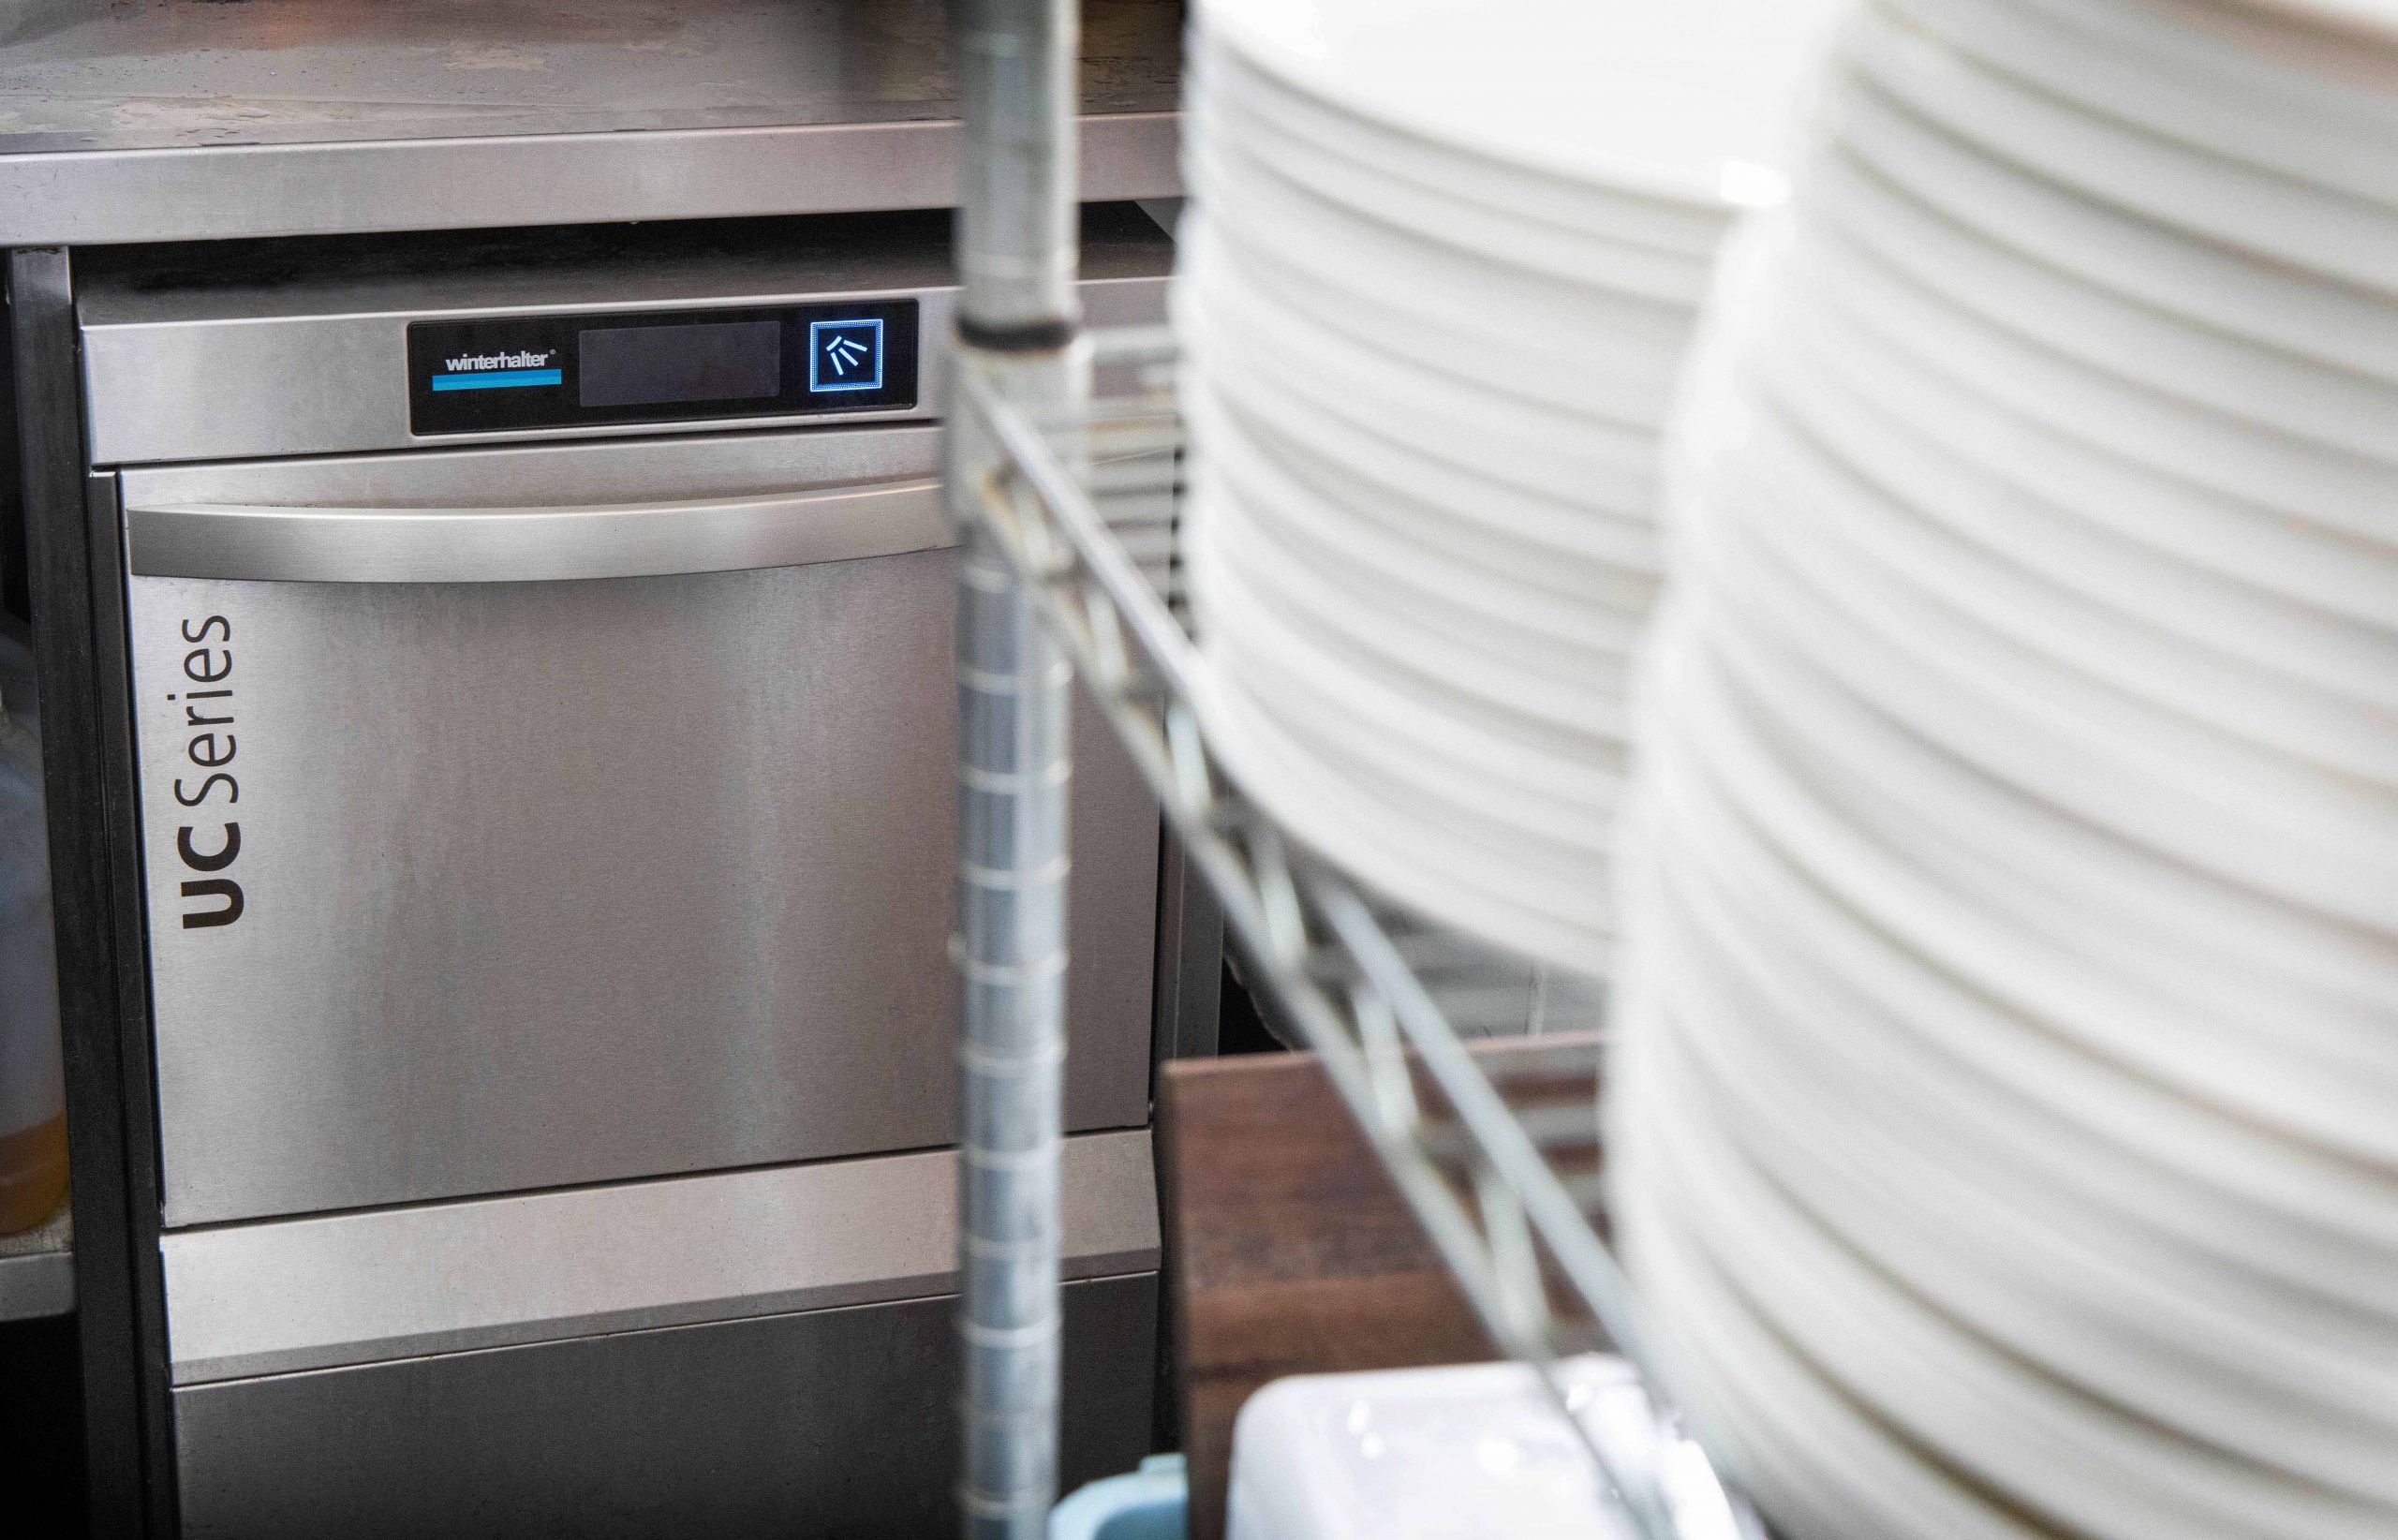 Seven steps to hygiene: how to restart a dishwasher coming out of lockdown